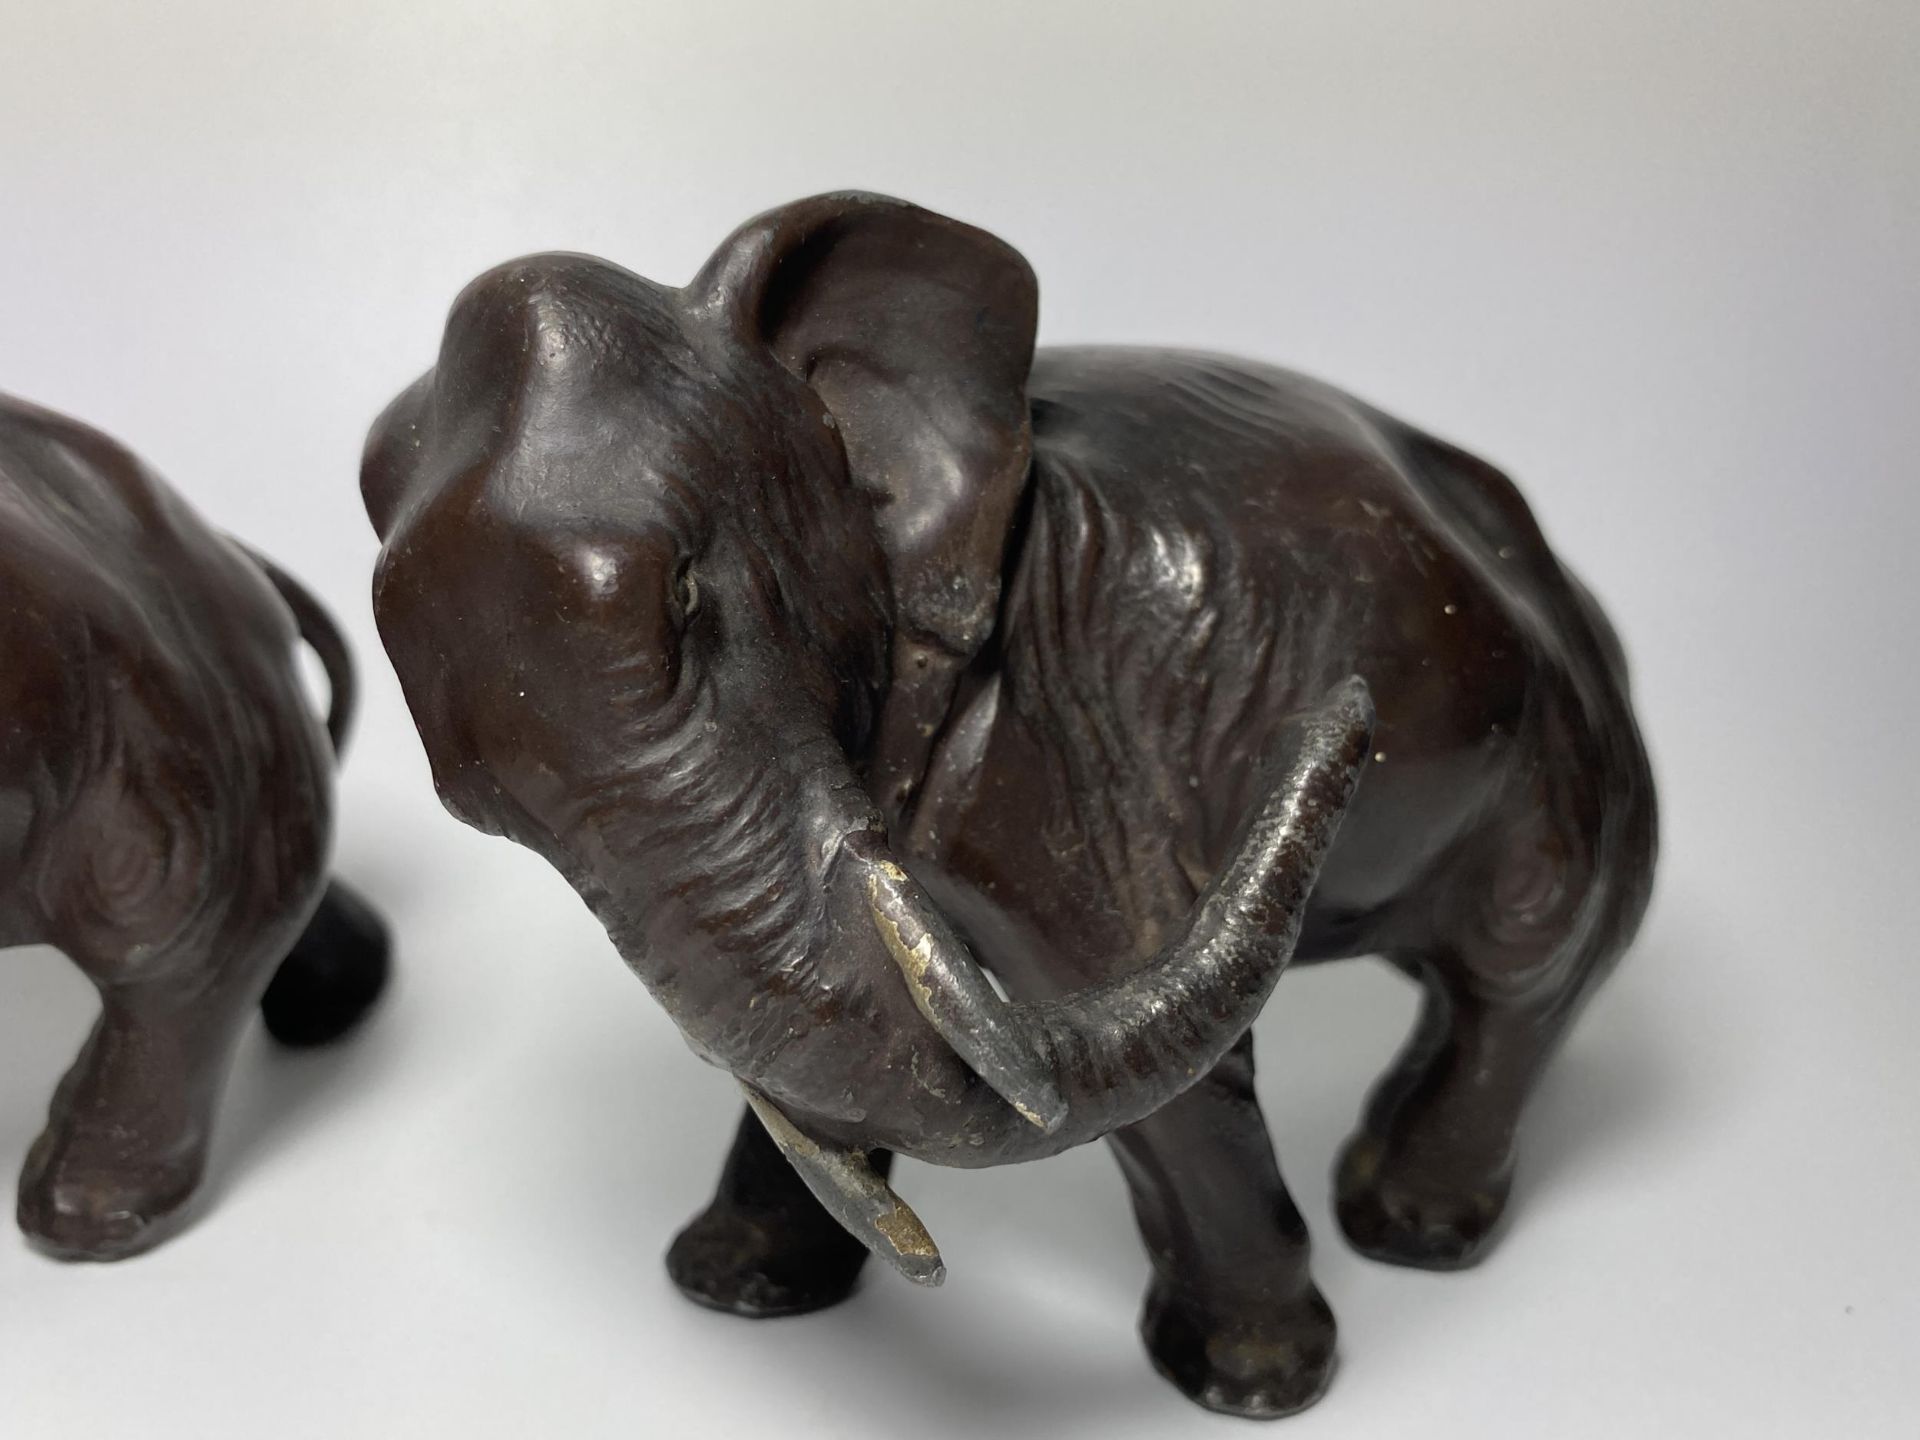 A PAIR OF EARLY 20TH CENTURY JAPANESE METAL MODELS OF ELEPHANTS, 10 X 14CM - Image 2 of 7